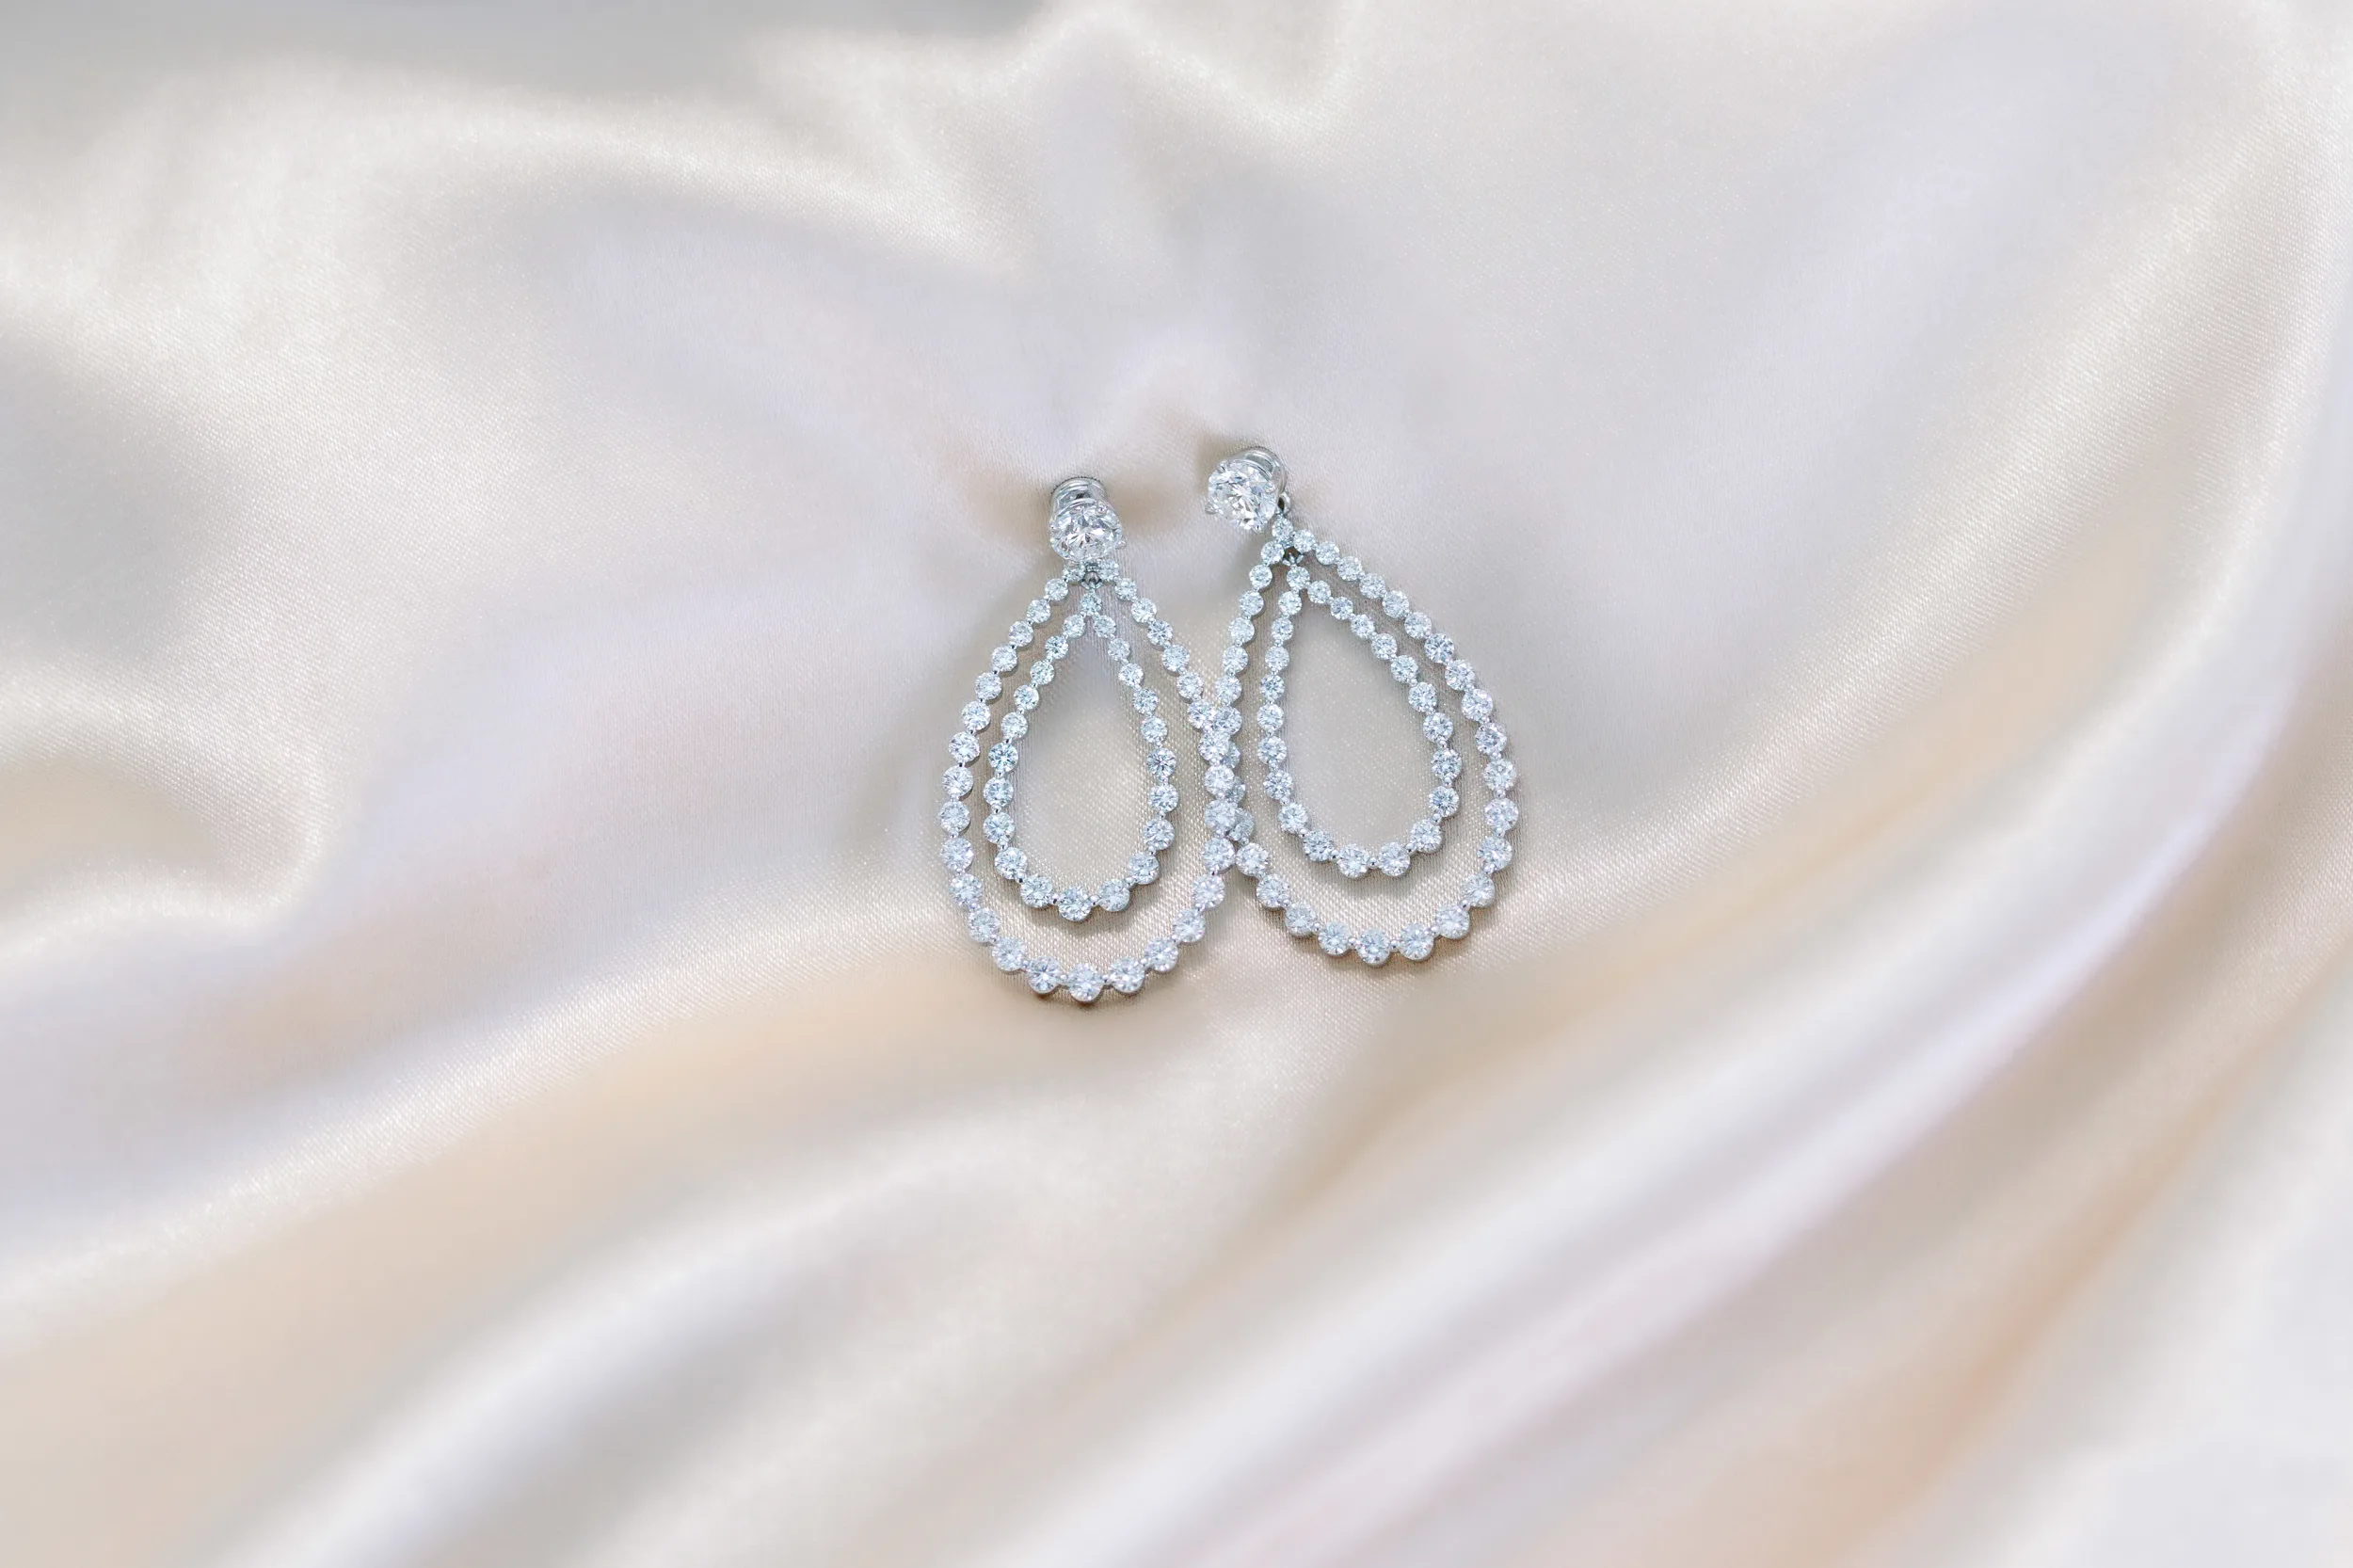 18k White Gold Double Open Pear Earring Jackets featuring 3.5 Carat Round Diamonds (Main View)